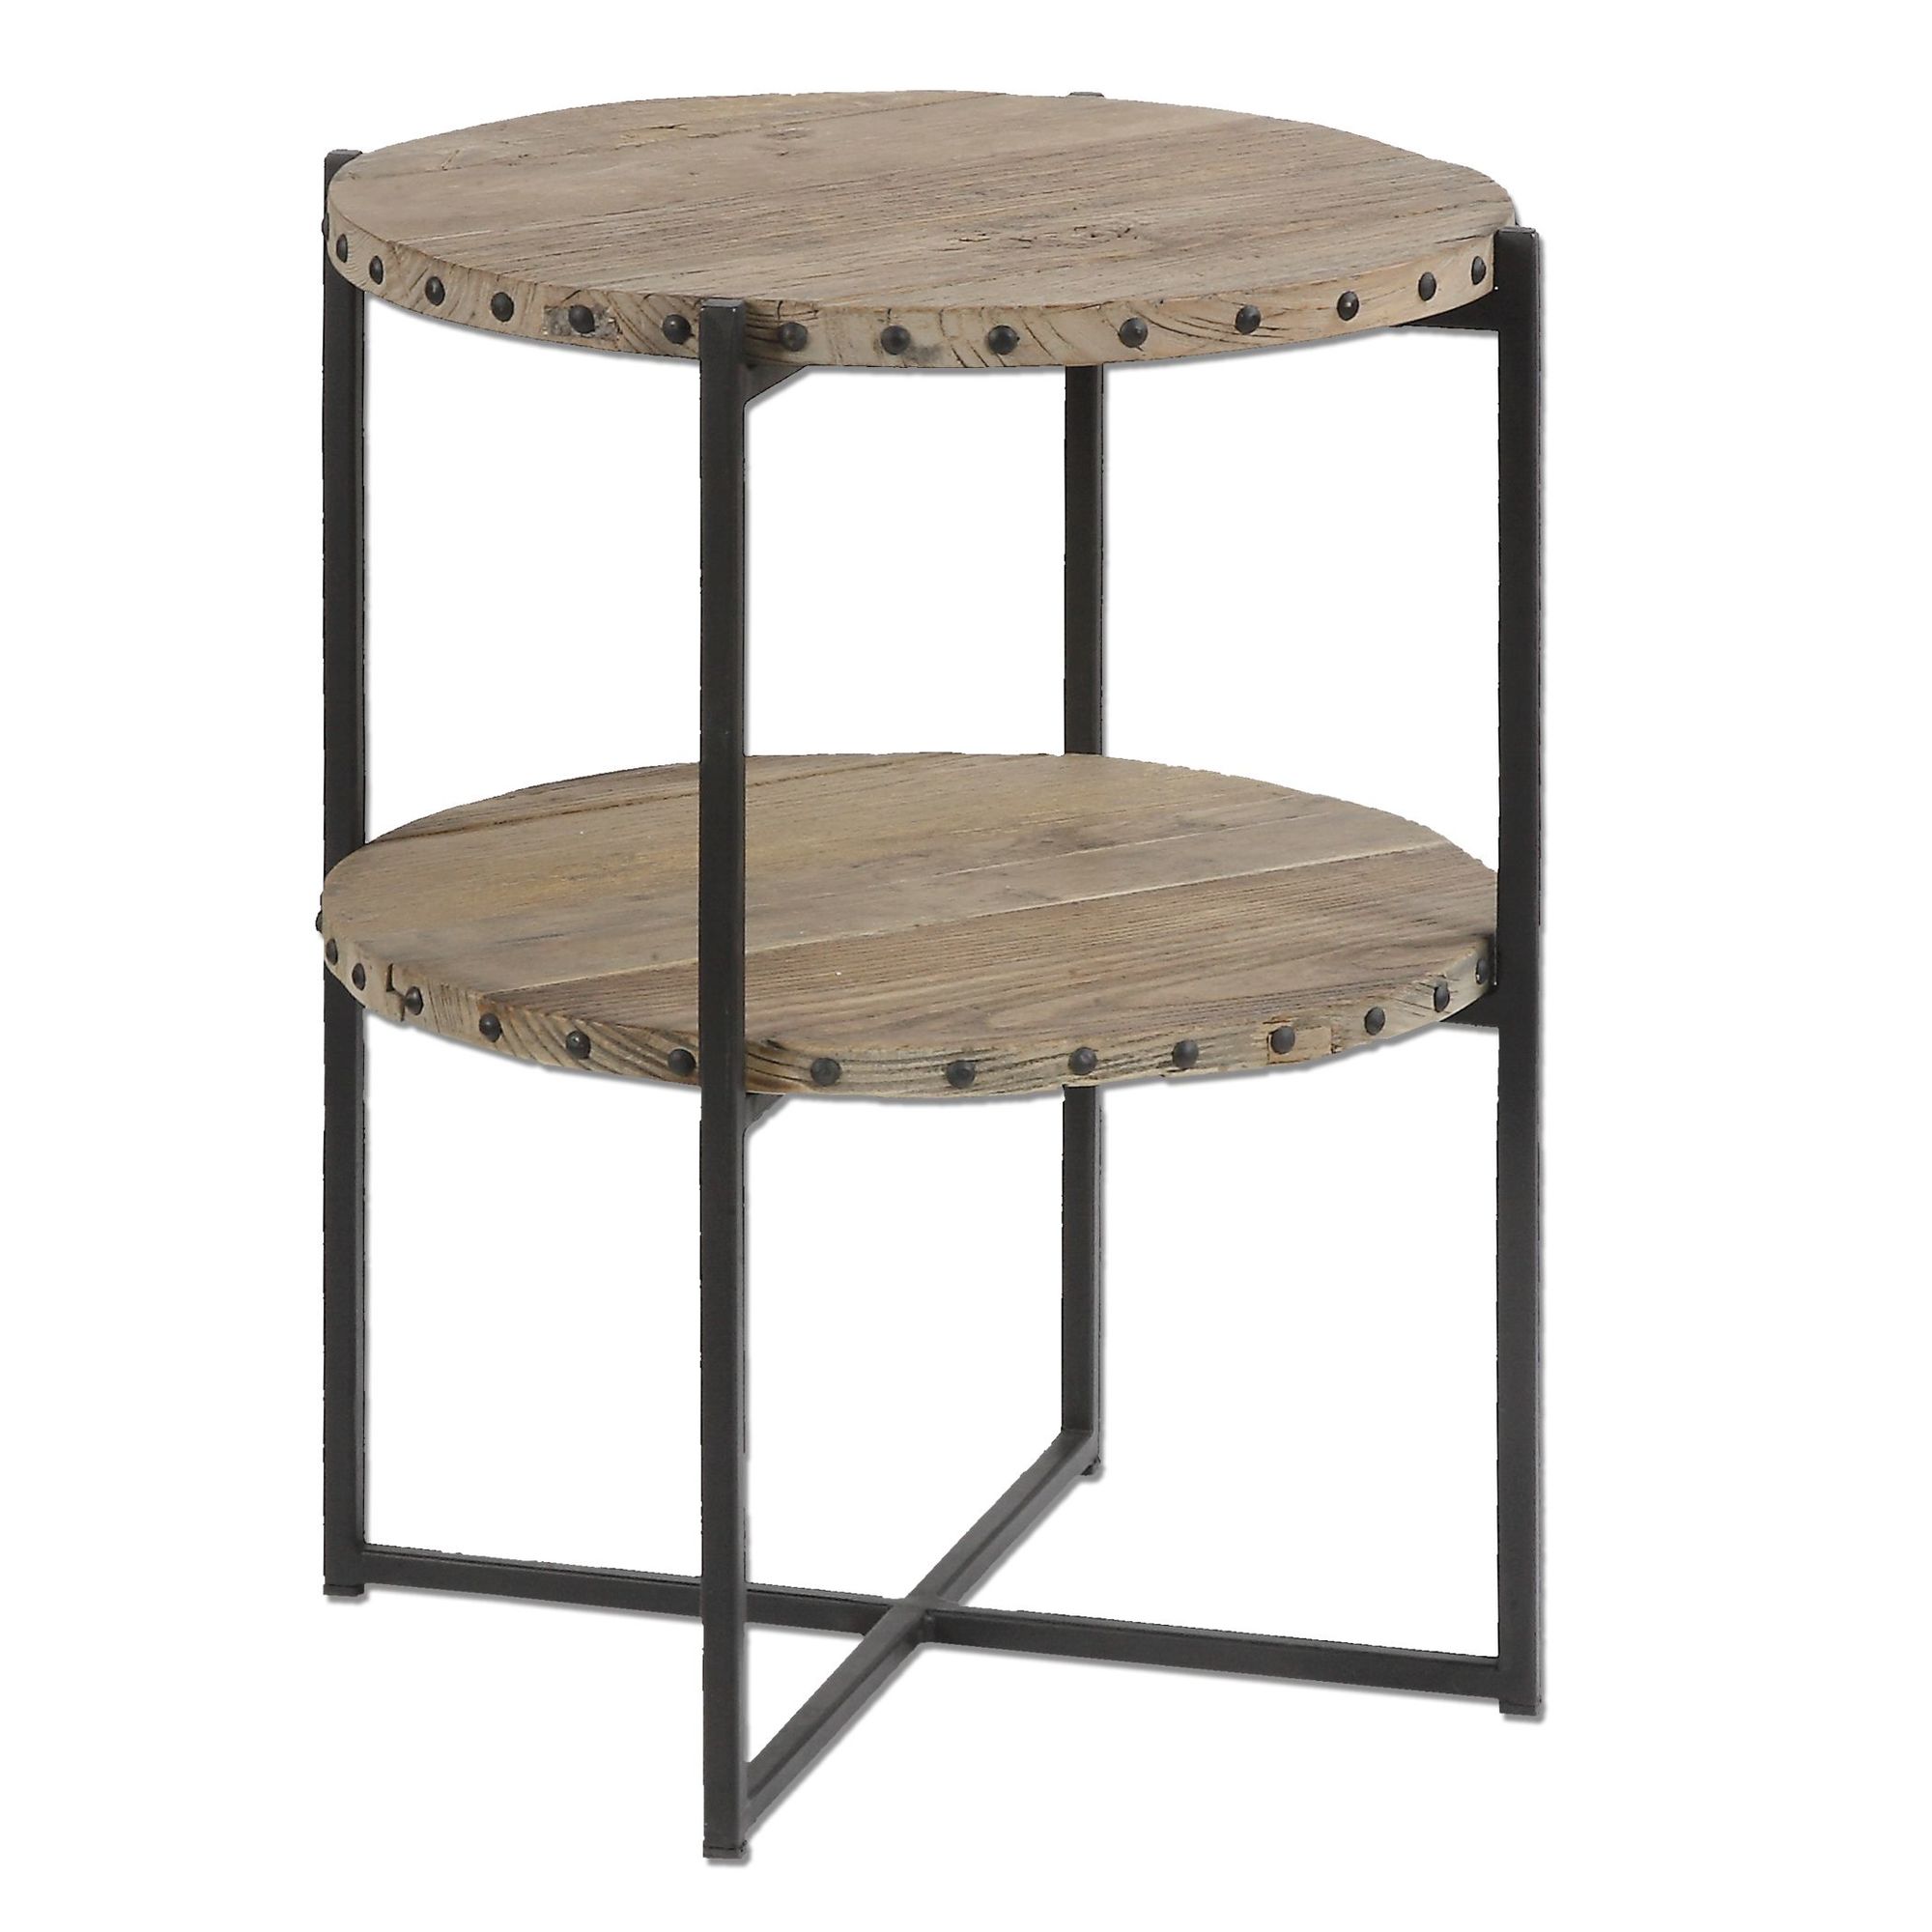 double layered round accent table gray mathis brothers furniture wood kitchen decor items farmhouse style dining room mini coffee black marble set and grey antique end tables cute